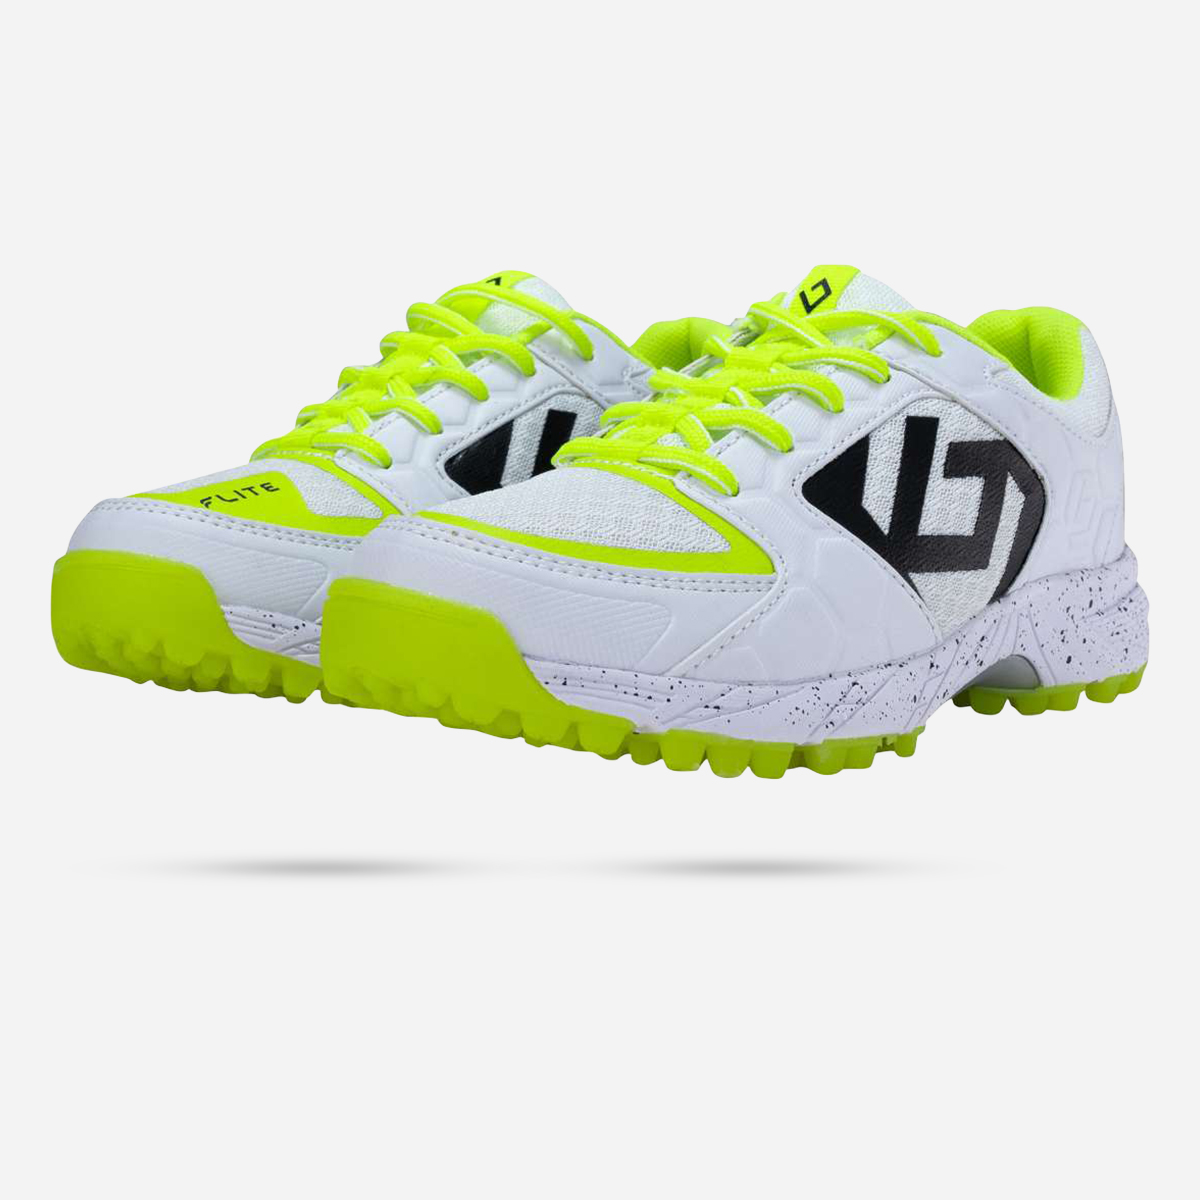 AN303129 Bf1033a Shoe Tribute Wh/neon Ylw